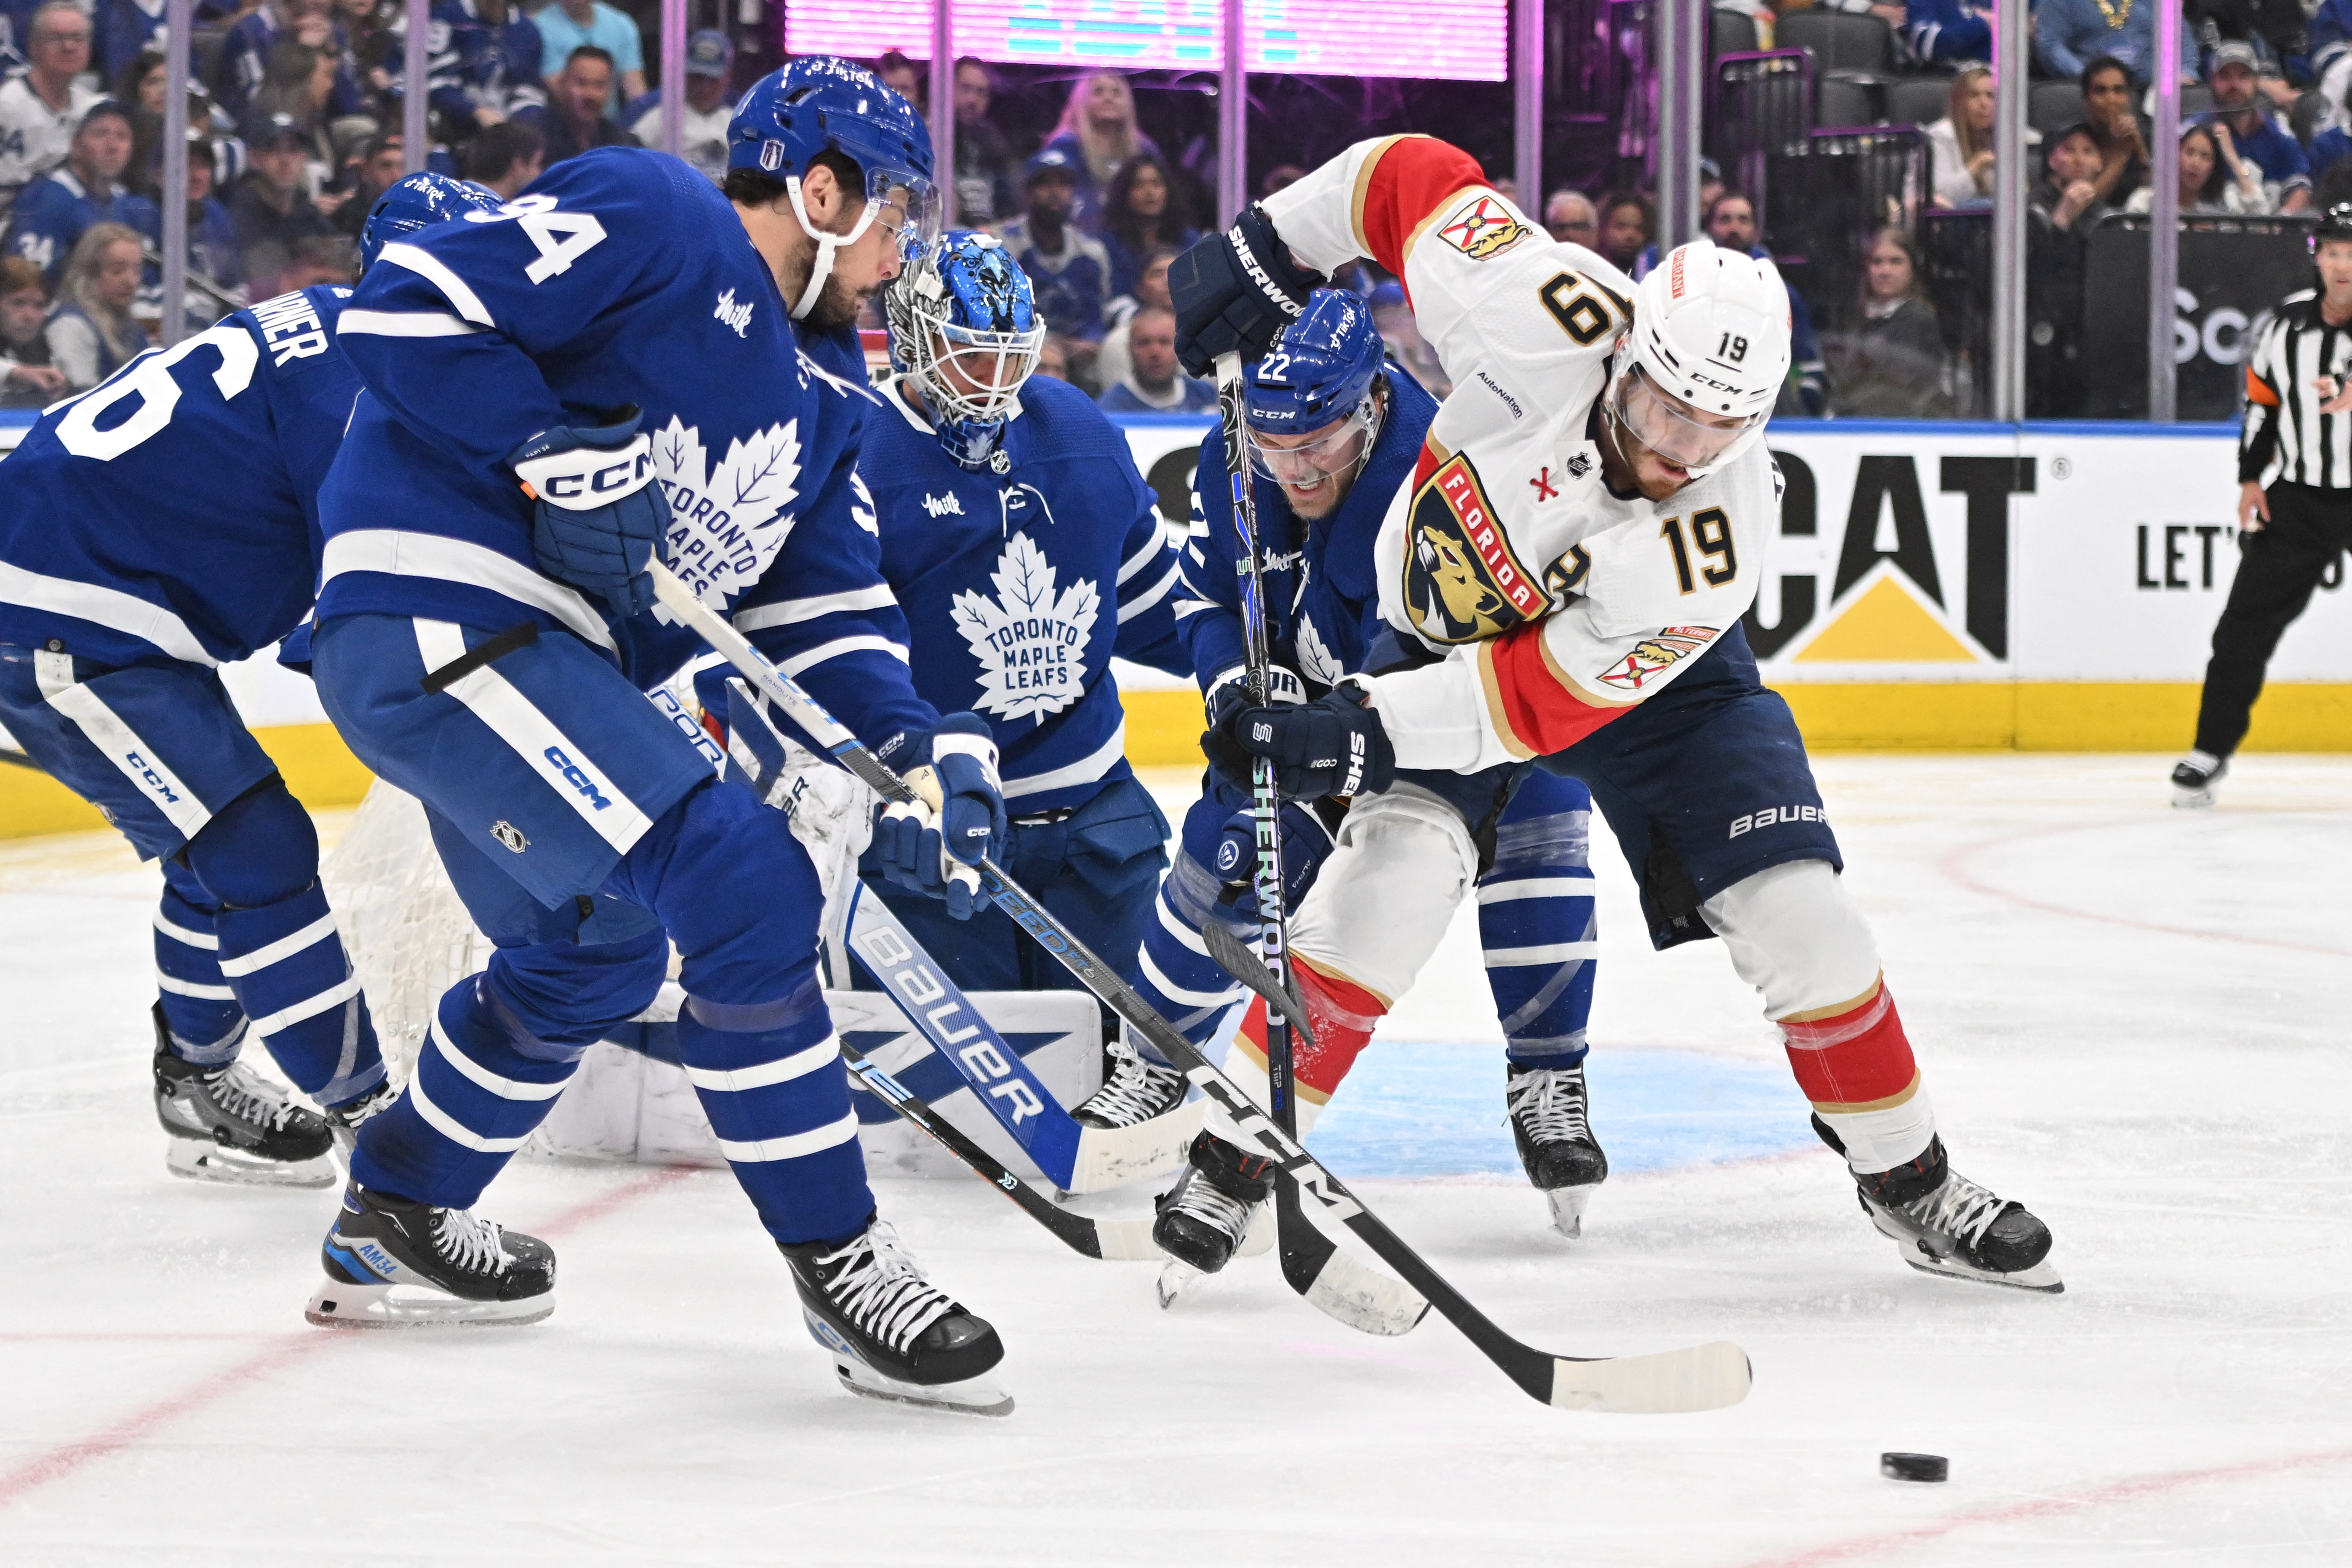 Maple Leafs still favored despite losing John Tavares for at least